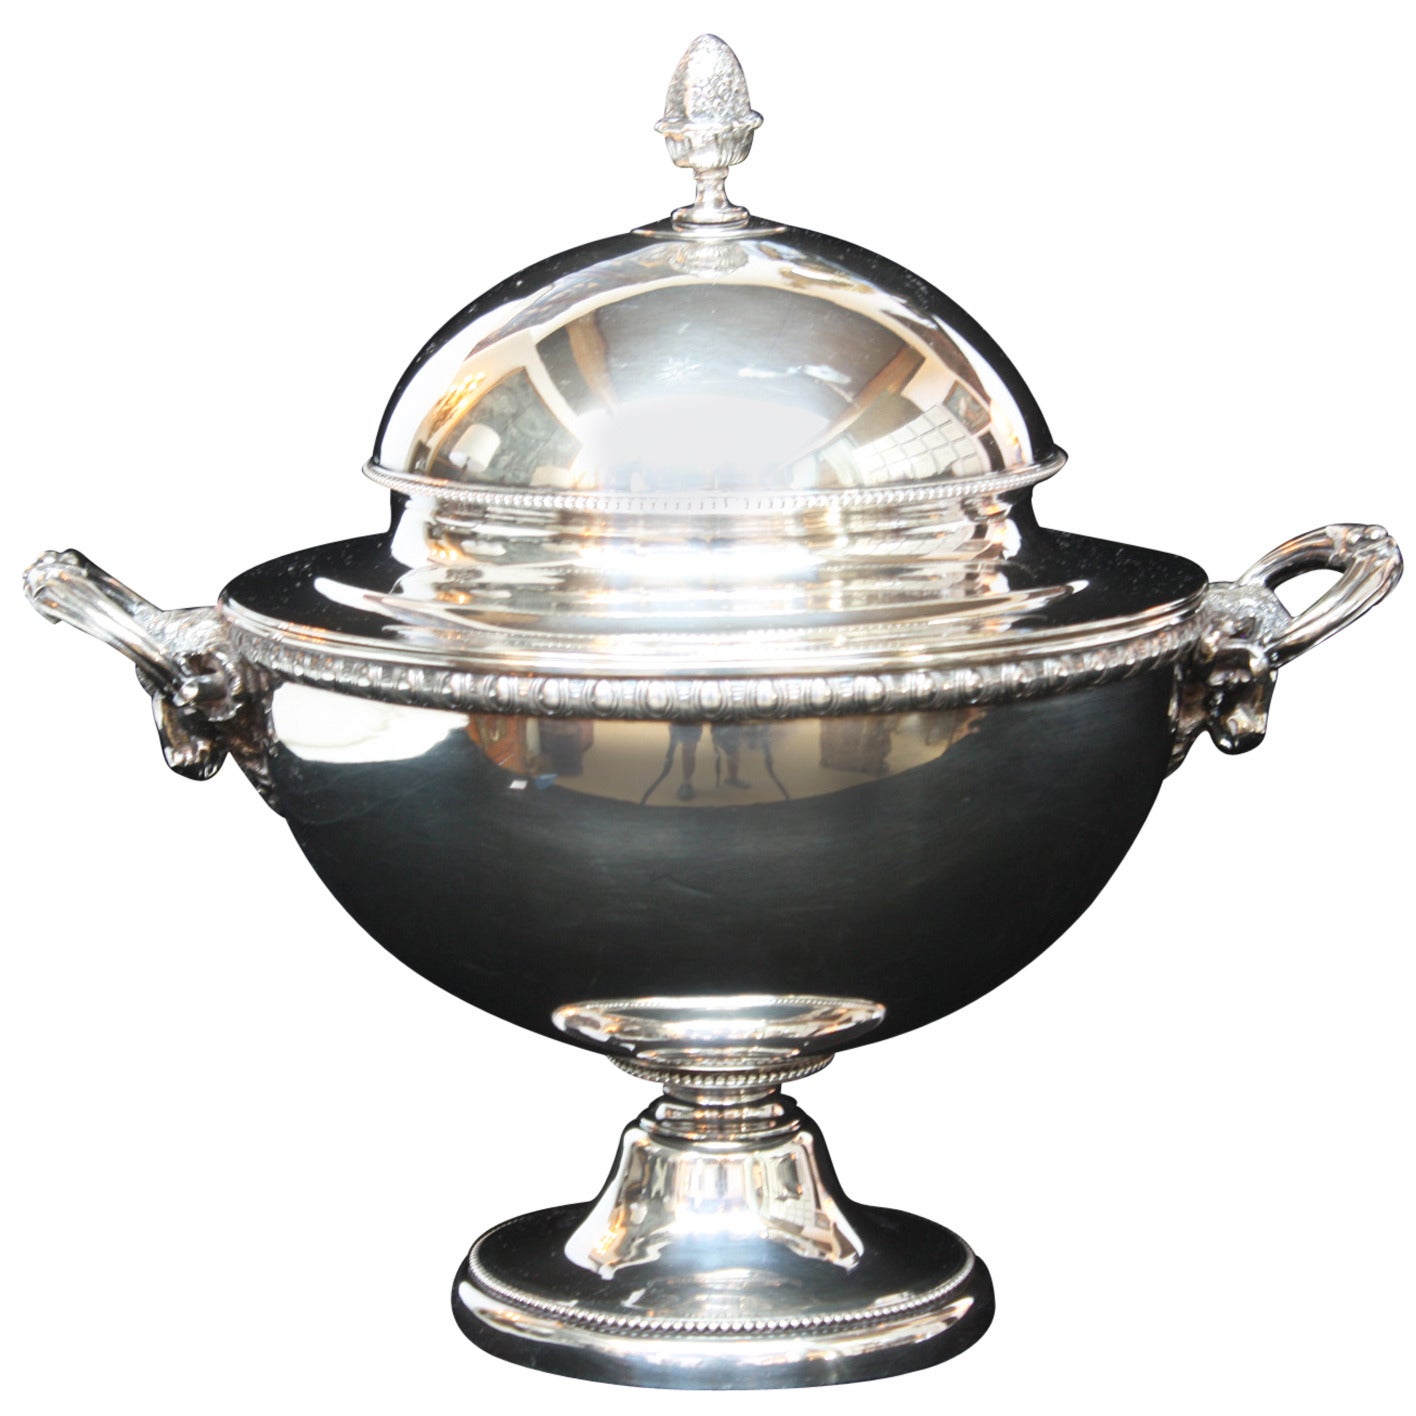 Tiffany & Co. Sterling Silver Dome Lidded Tureen or Horse Racing Trophy